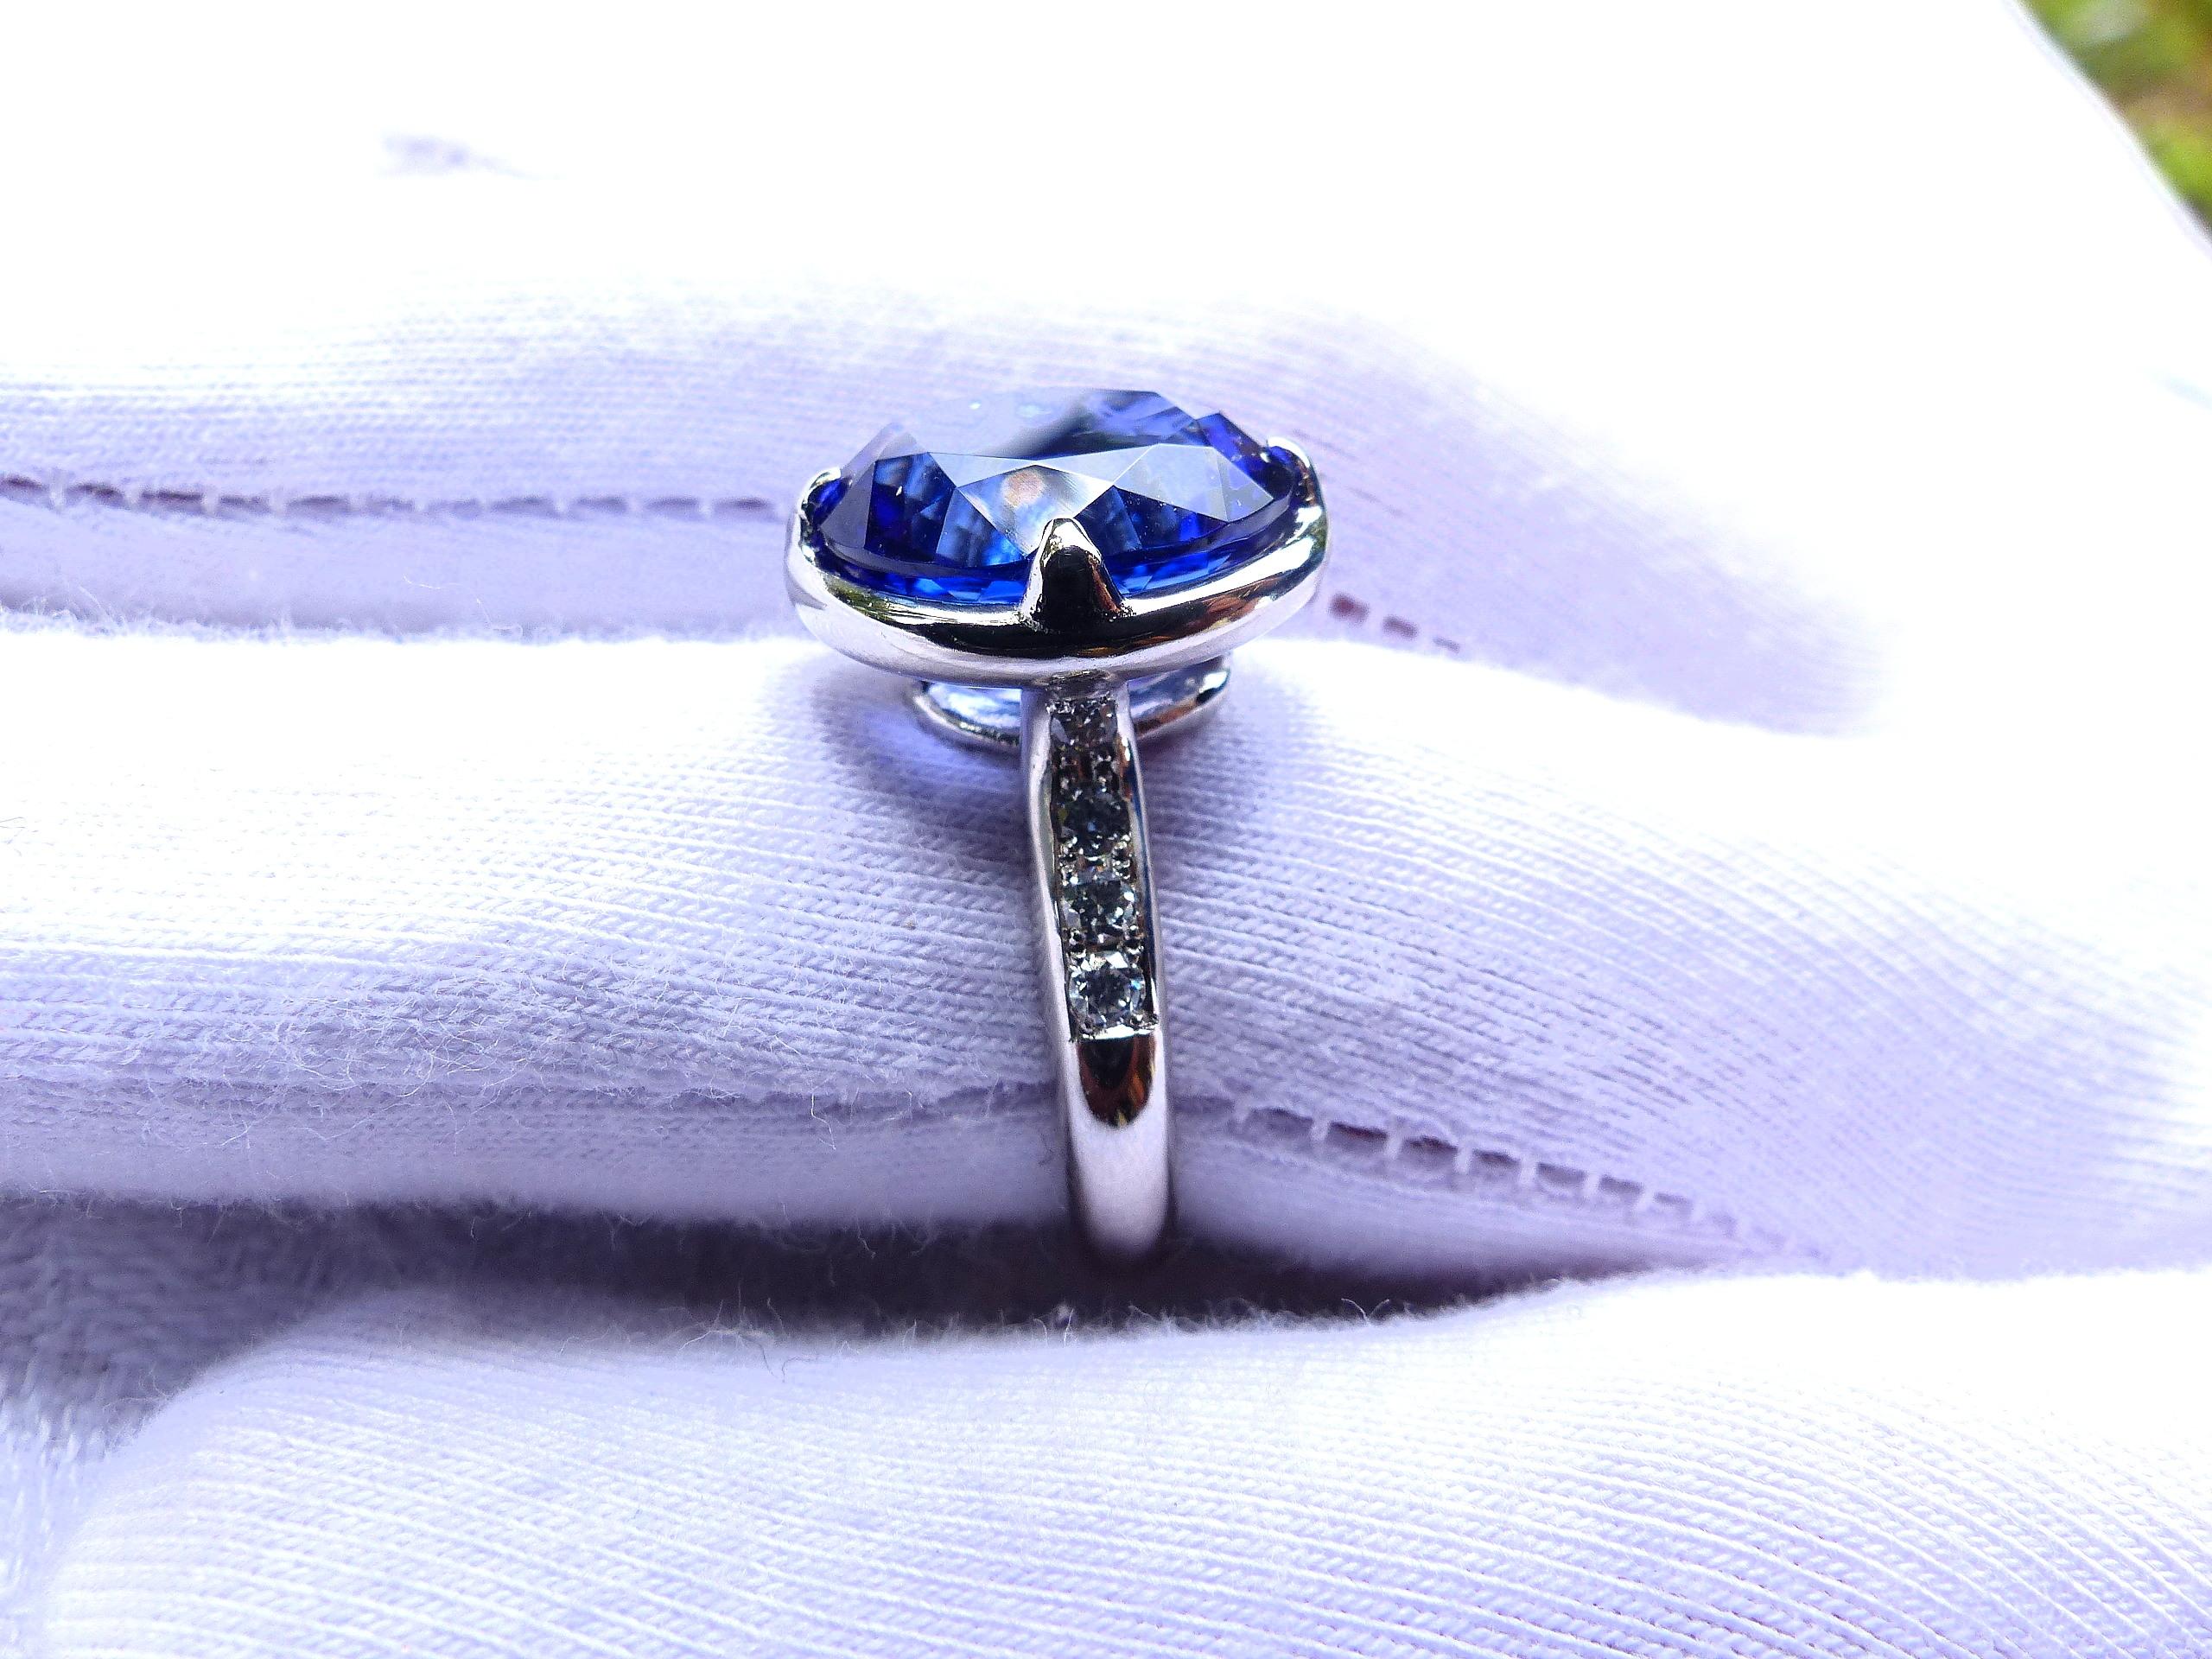 Women's Ring in Platinum with 1 Tanzanite oval 13x11mm, 7, 50ct. and Diamonds. For Sale